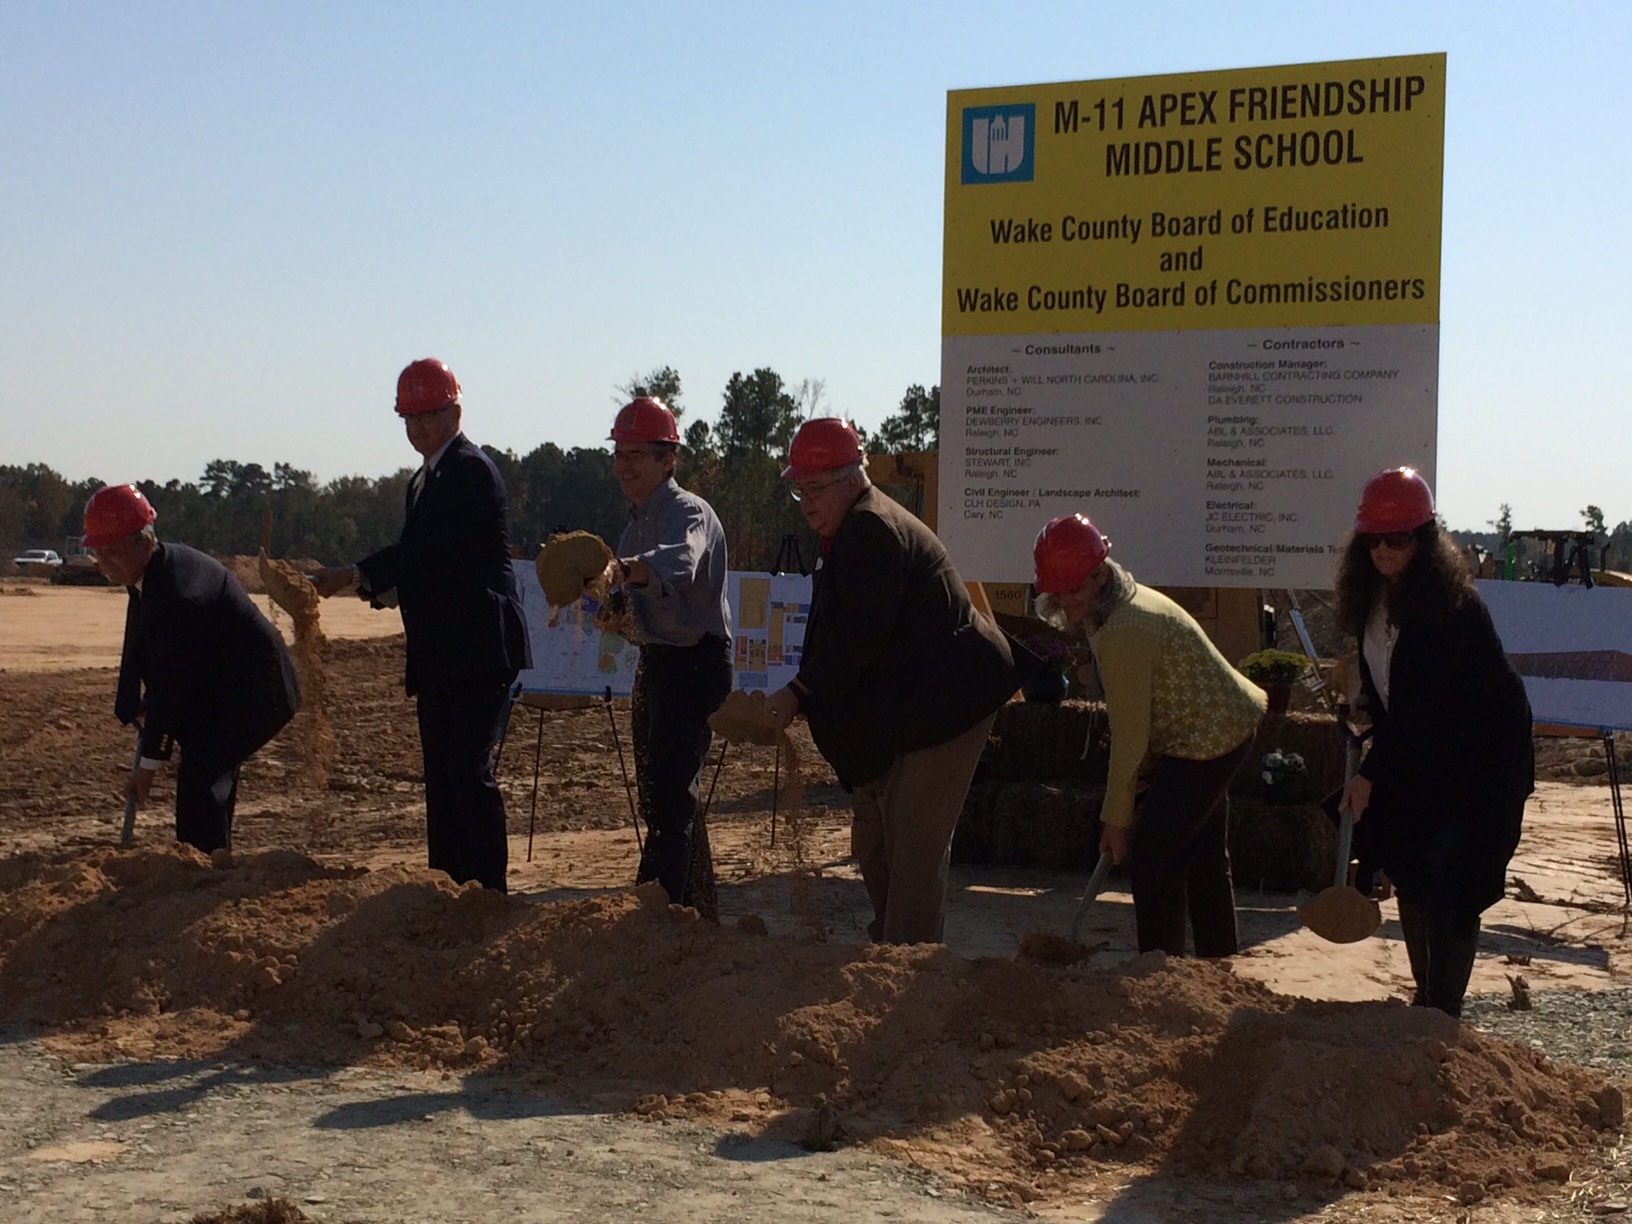 Groundbreaking Ceremony for Apex Friendship Middle School